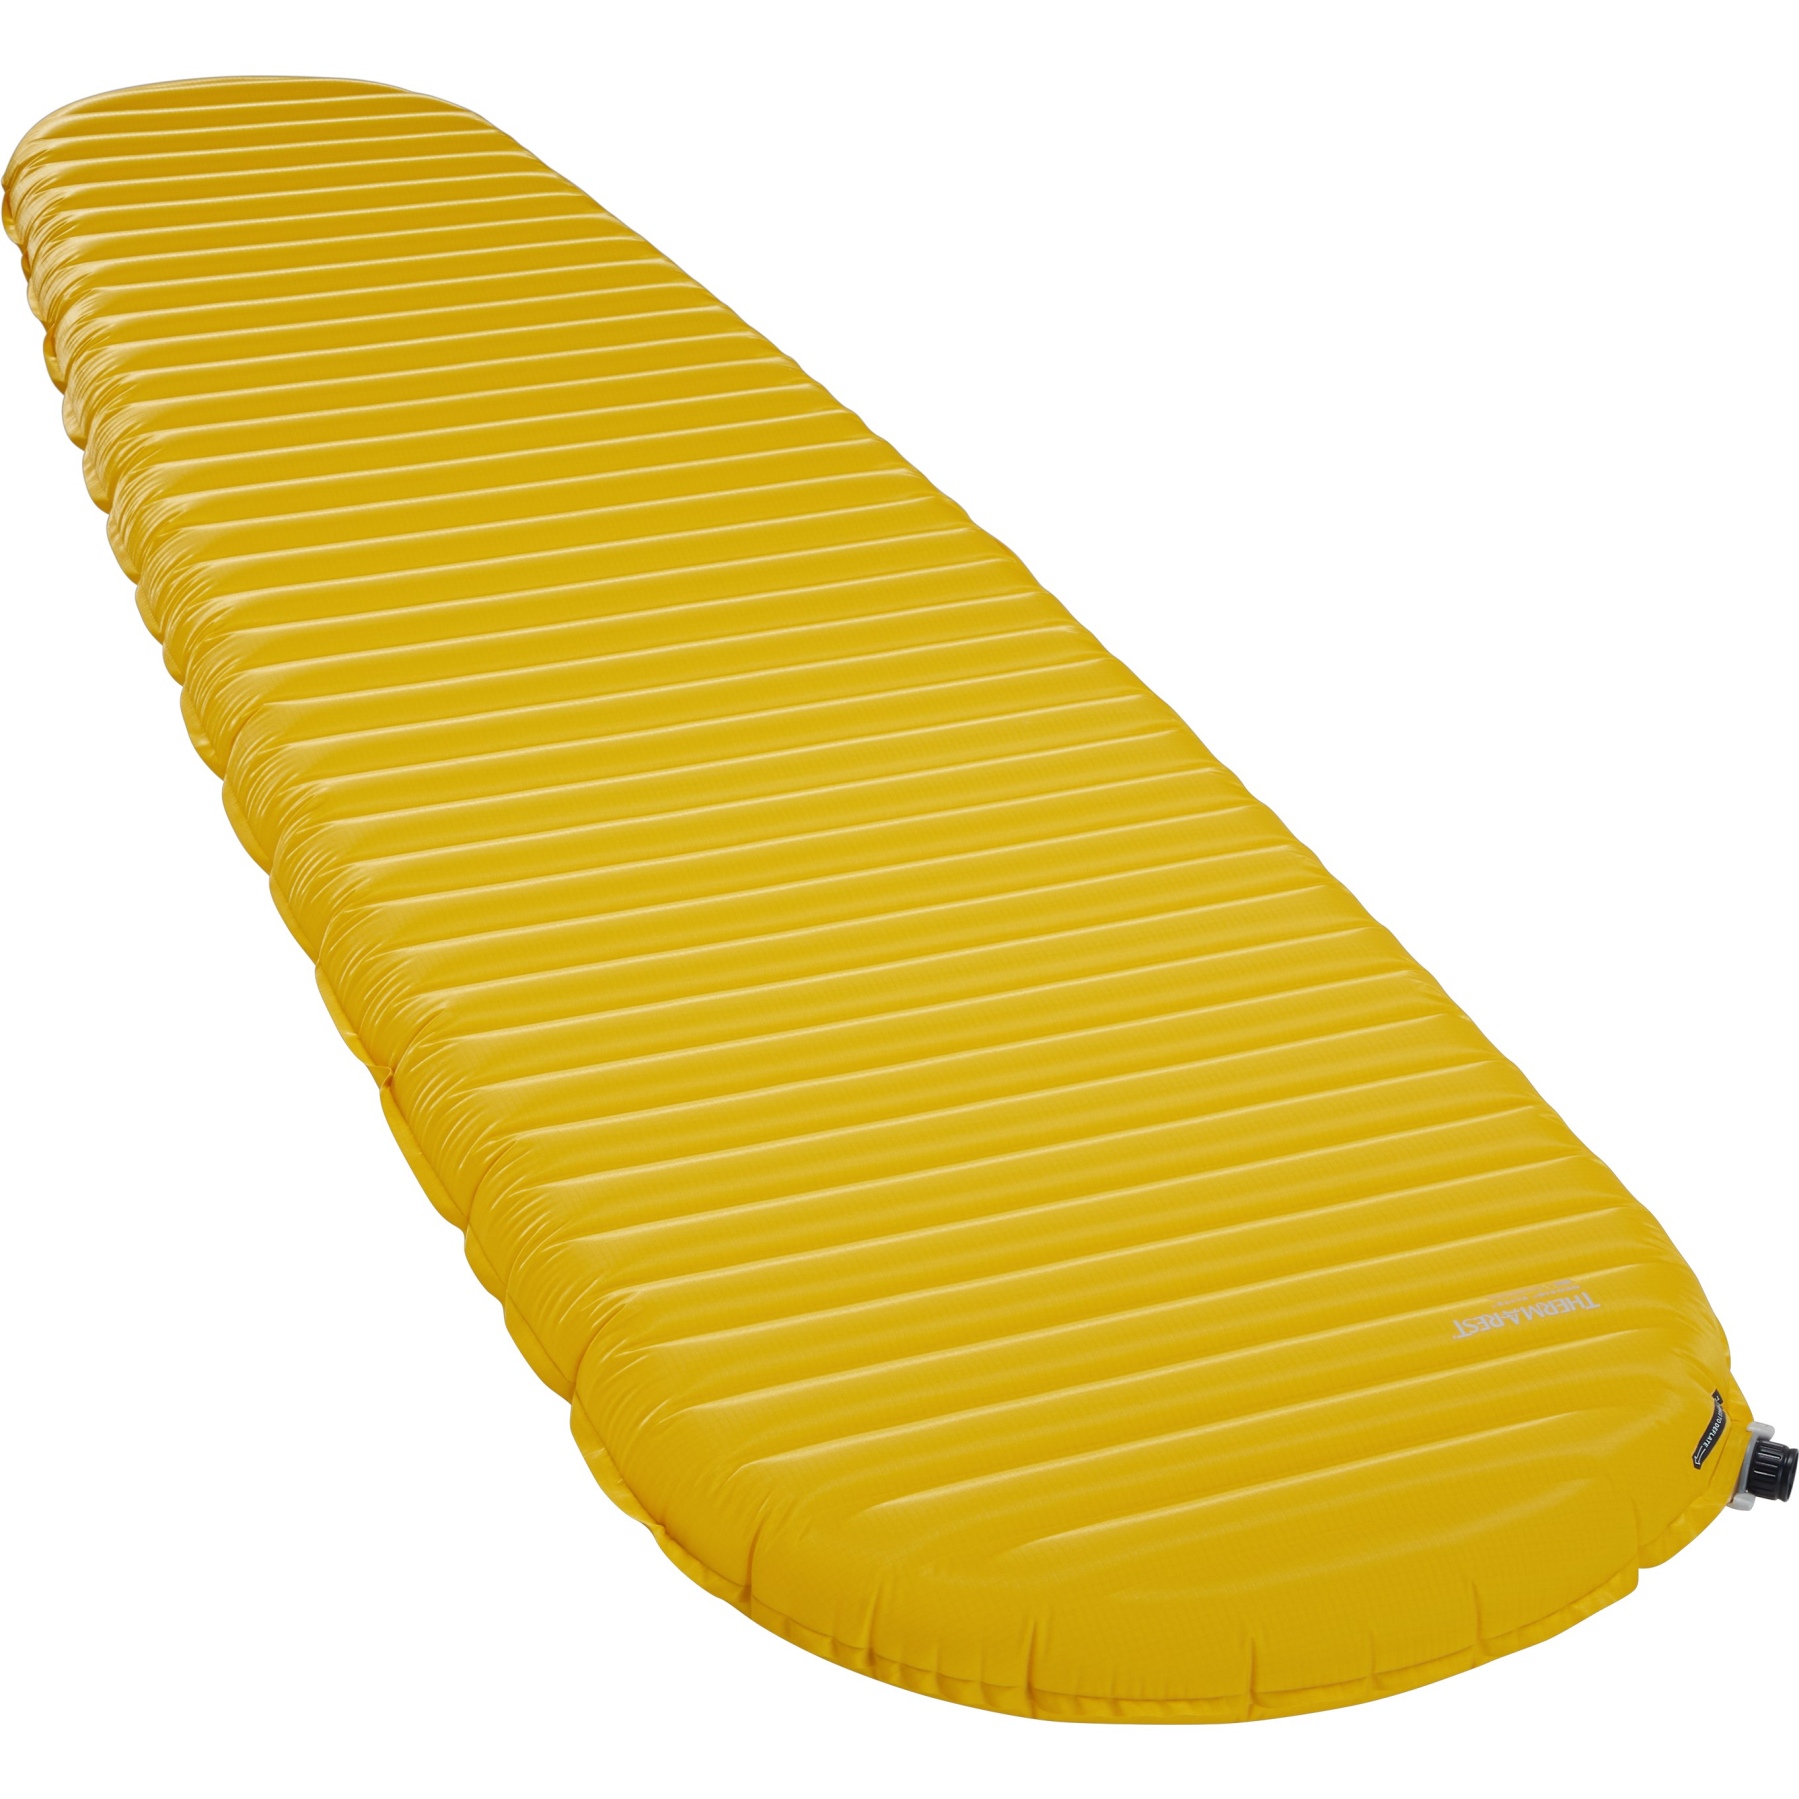 Picture of Therm-a-Rest NeoAir Xlite NXT Sleeping Pad - Regular - Solar Flare